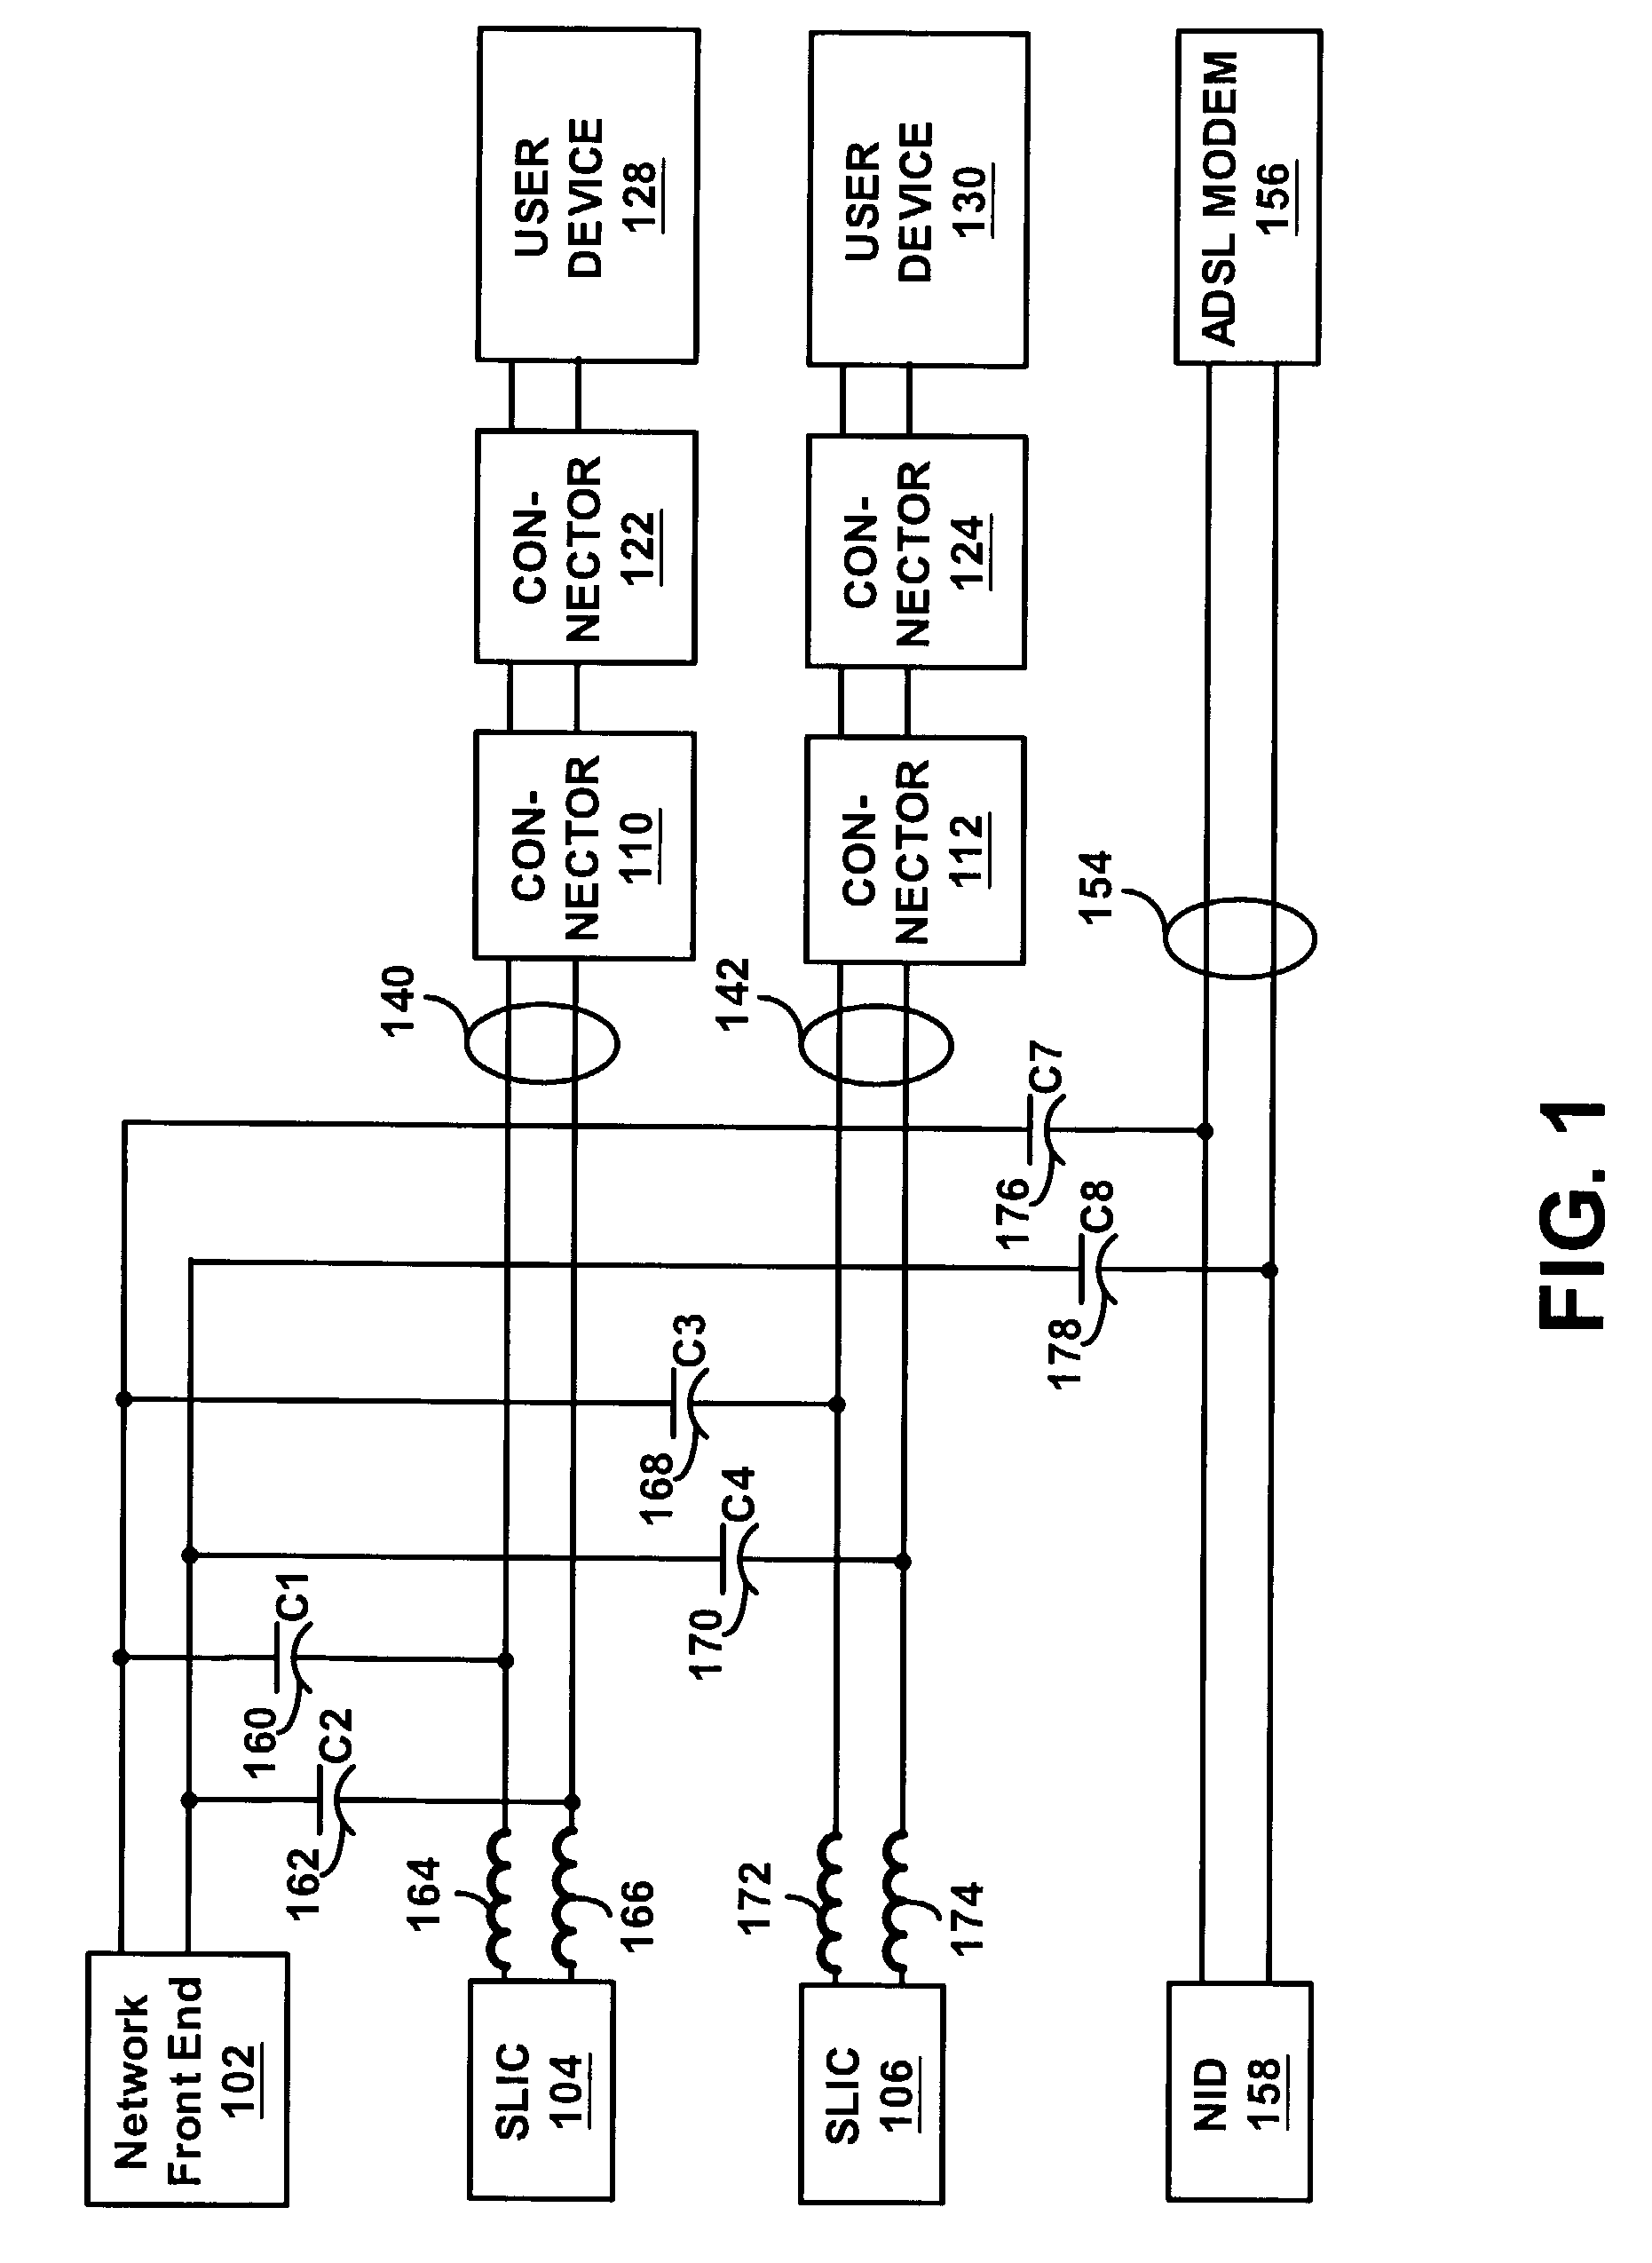 System for allowing a single device to share multiple transmission lines